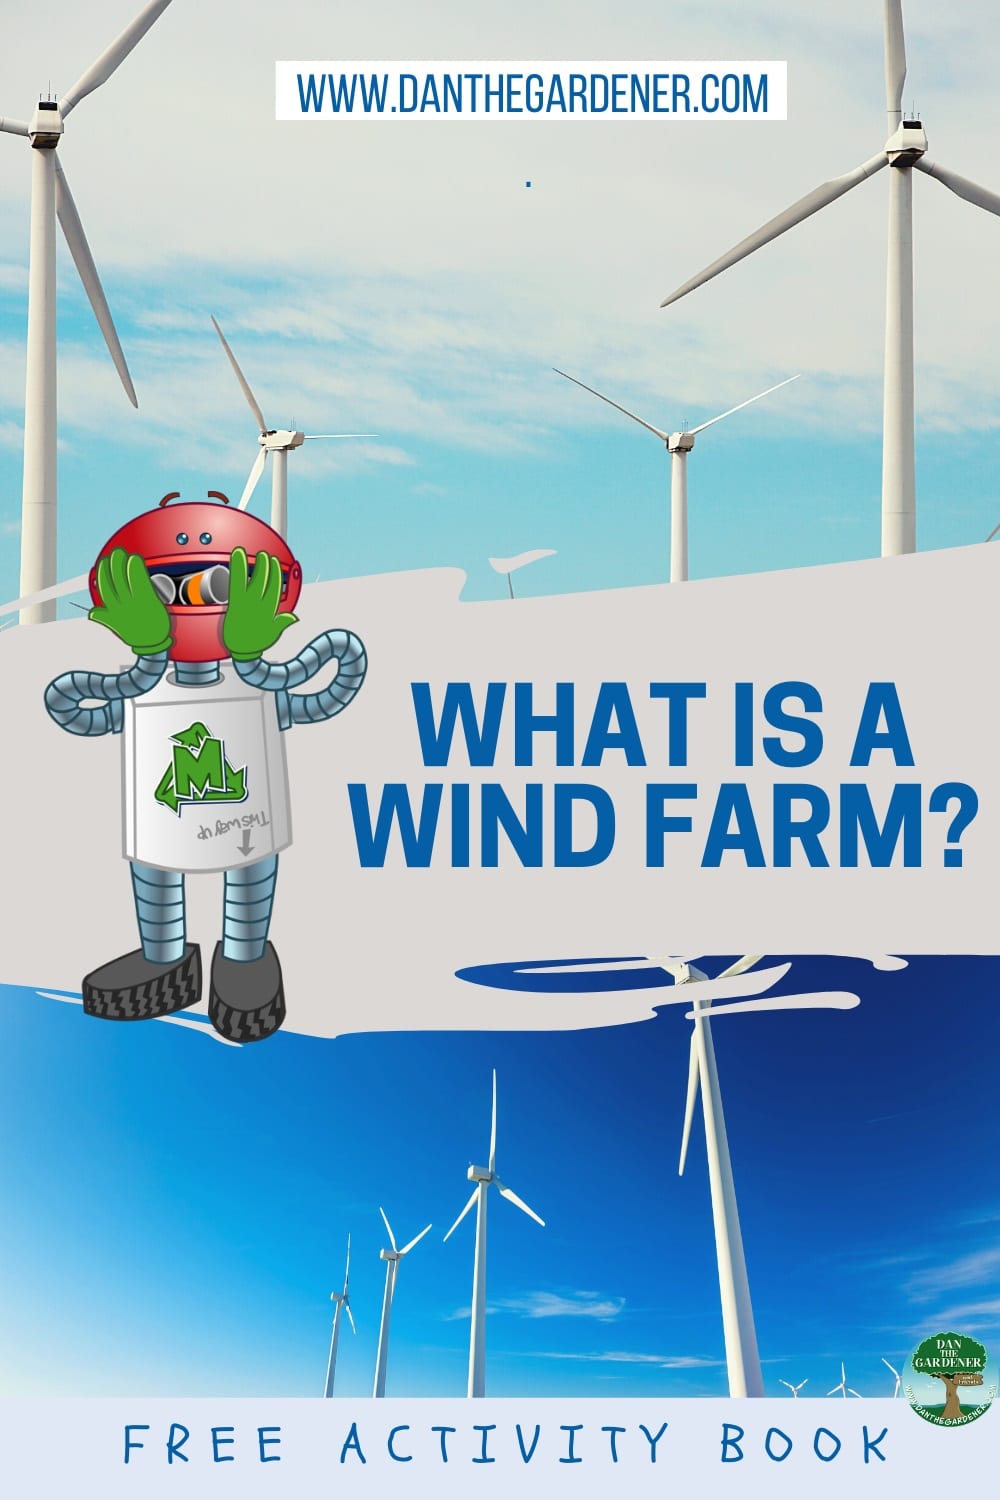 What is a Wind Farm?